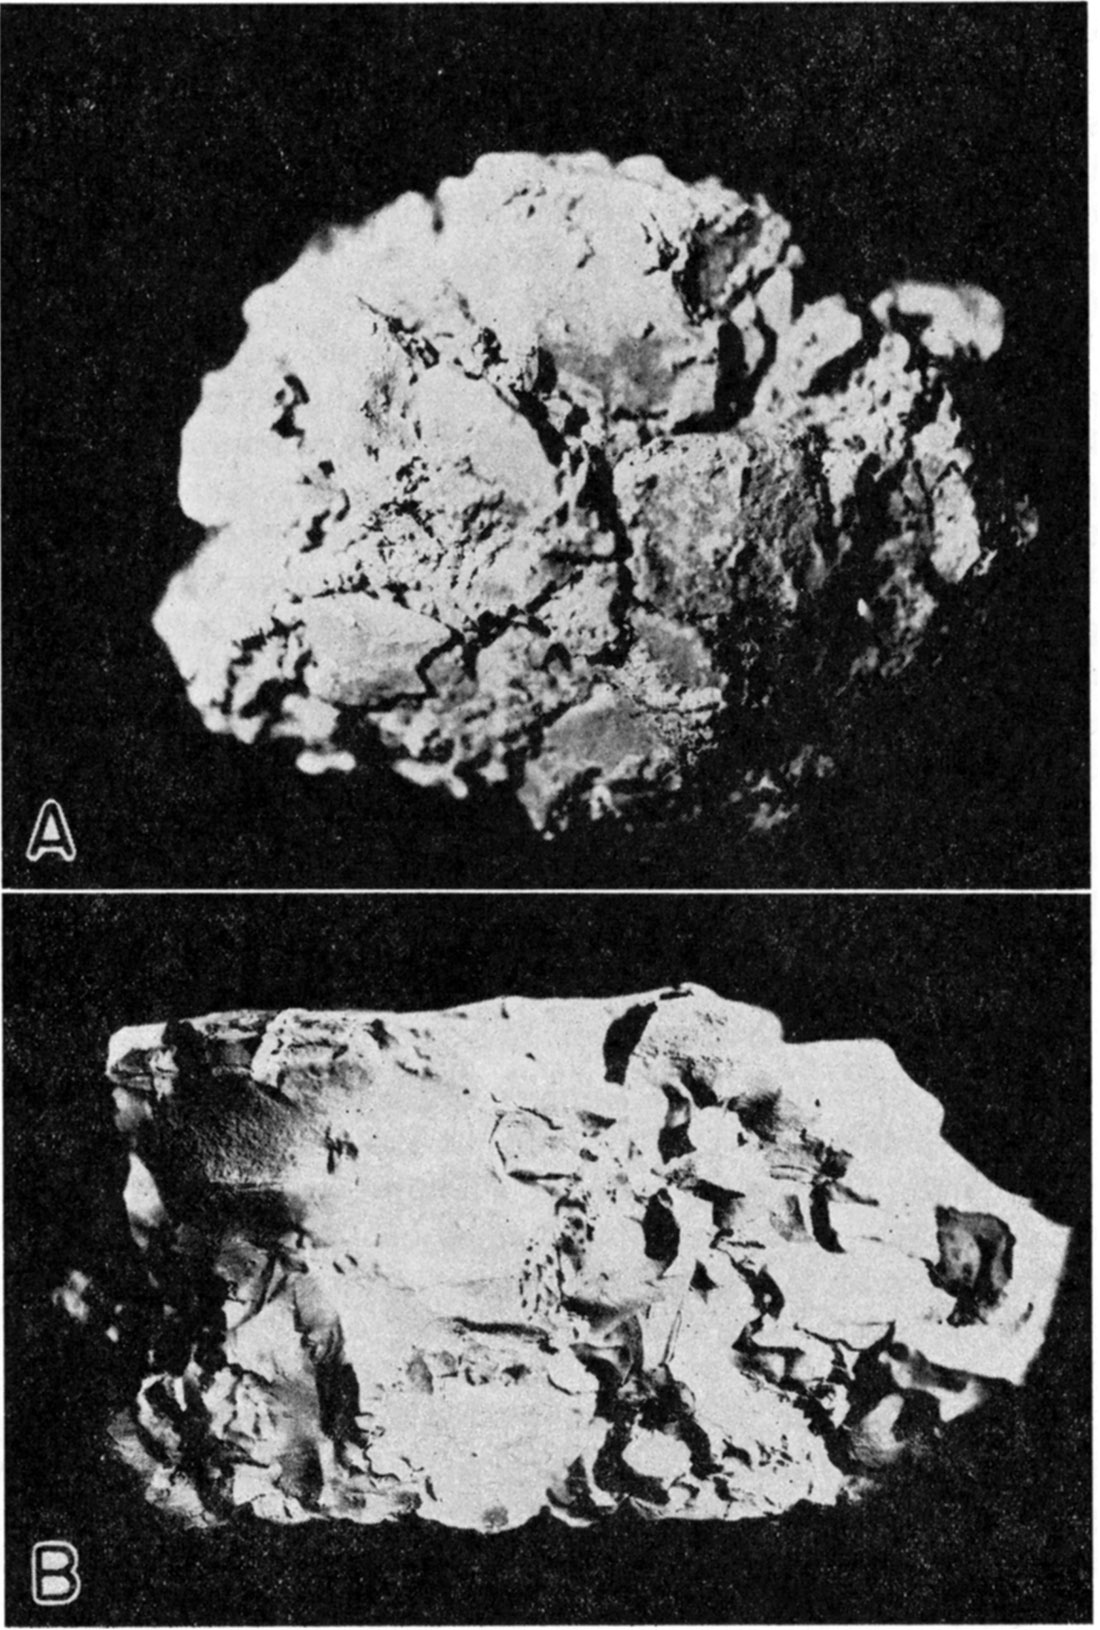 Two black and white photos; top is Alkali bentonite, Phillips County; bottom is Alkali sub-bentonite, Wallace County.